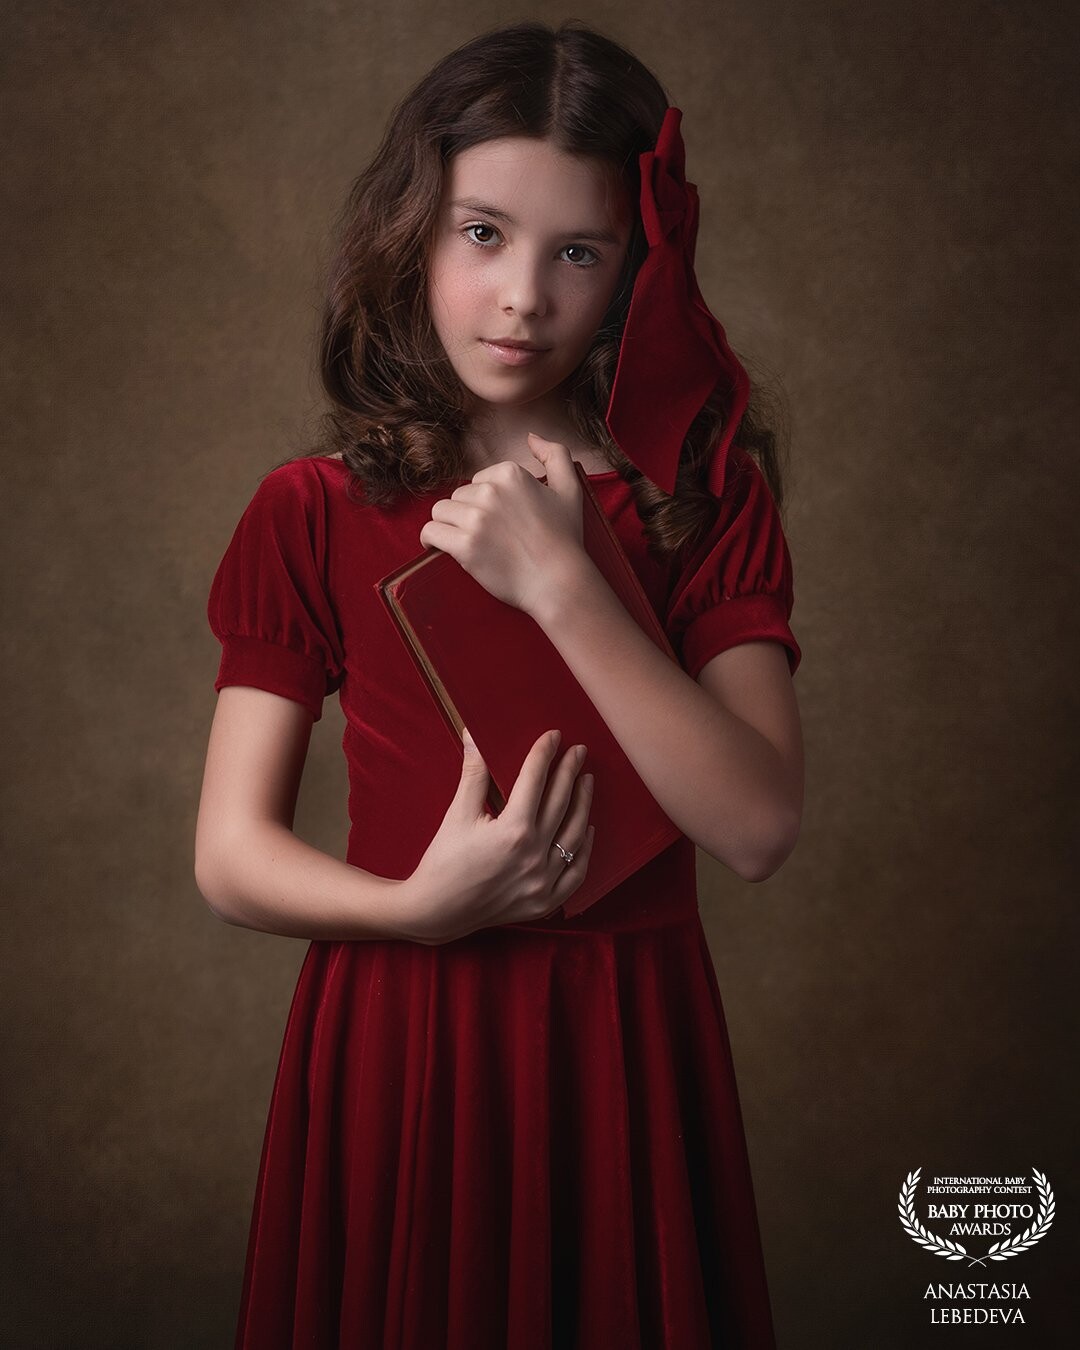 My favorite portrait collection is "Children".<br />
Each child is unique and unrepeatable in their own way!<br />
How I love red. In this photo, the red color and the girl in red look great)